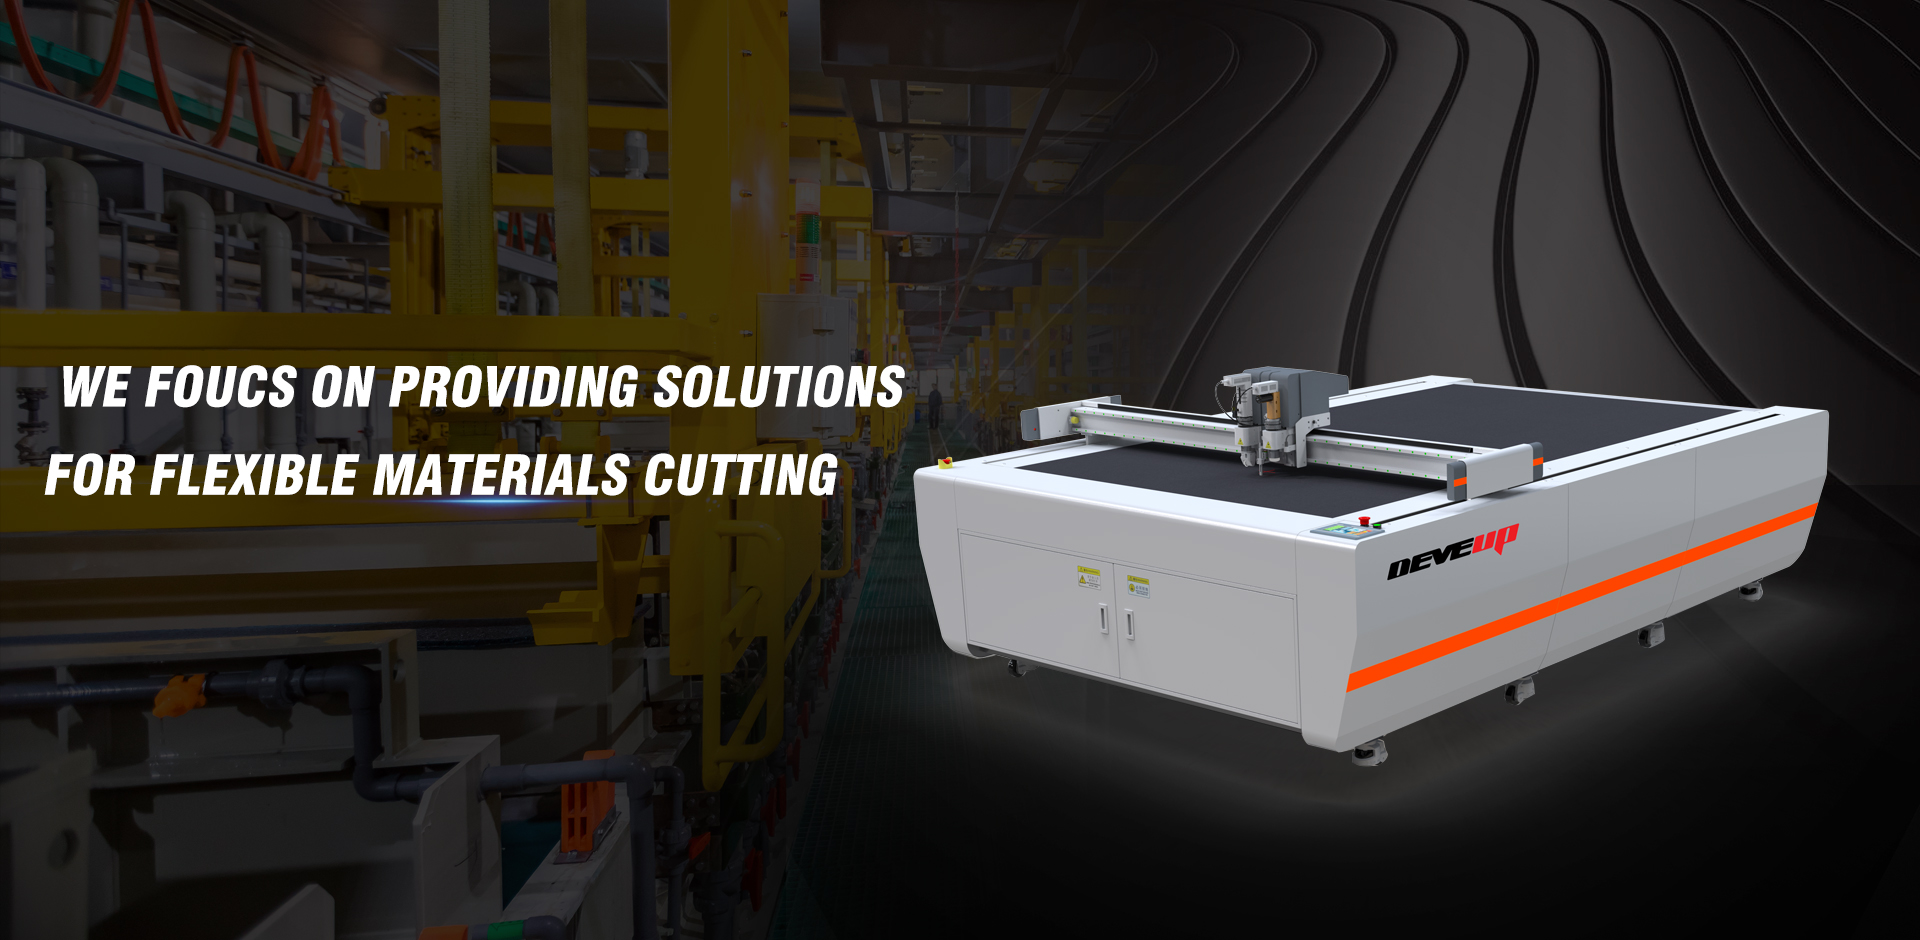 WE FOUCS ON PROVIDING SOLUTIONS FOR FLEXIBLE MATERIALS CUTTING